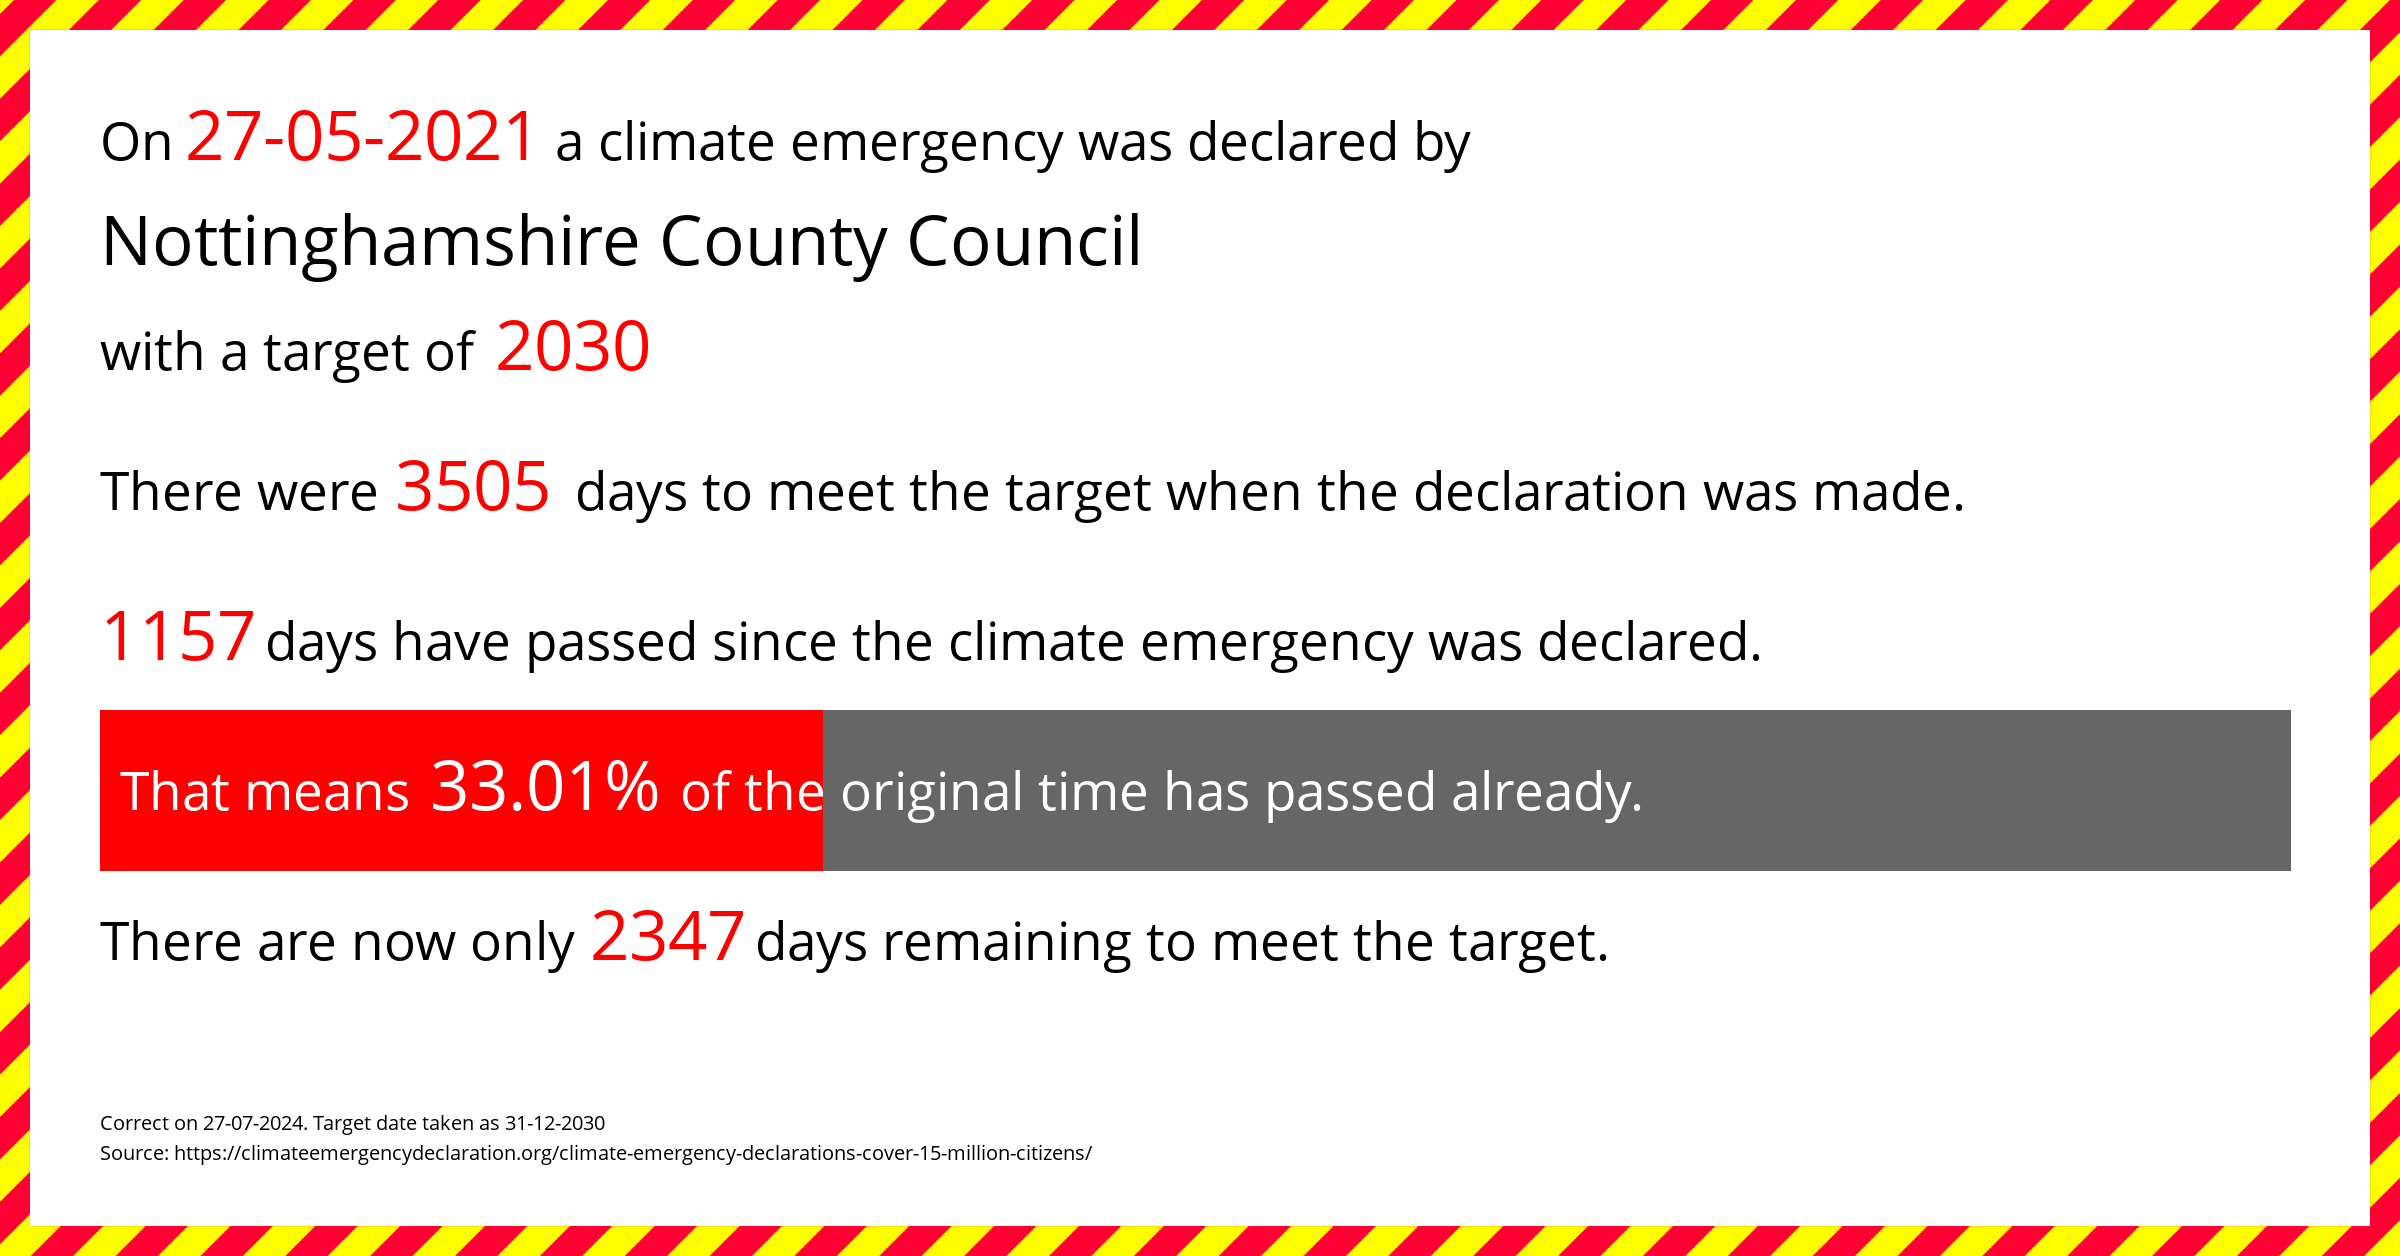 Nottinghamshire County Council  declared a Climate emergency on Thursday 27th May 2021, with a target of 2030.